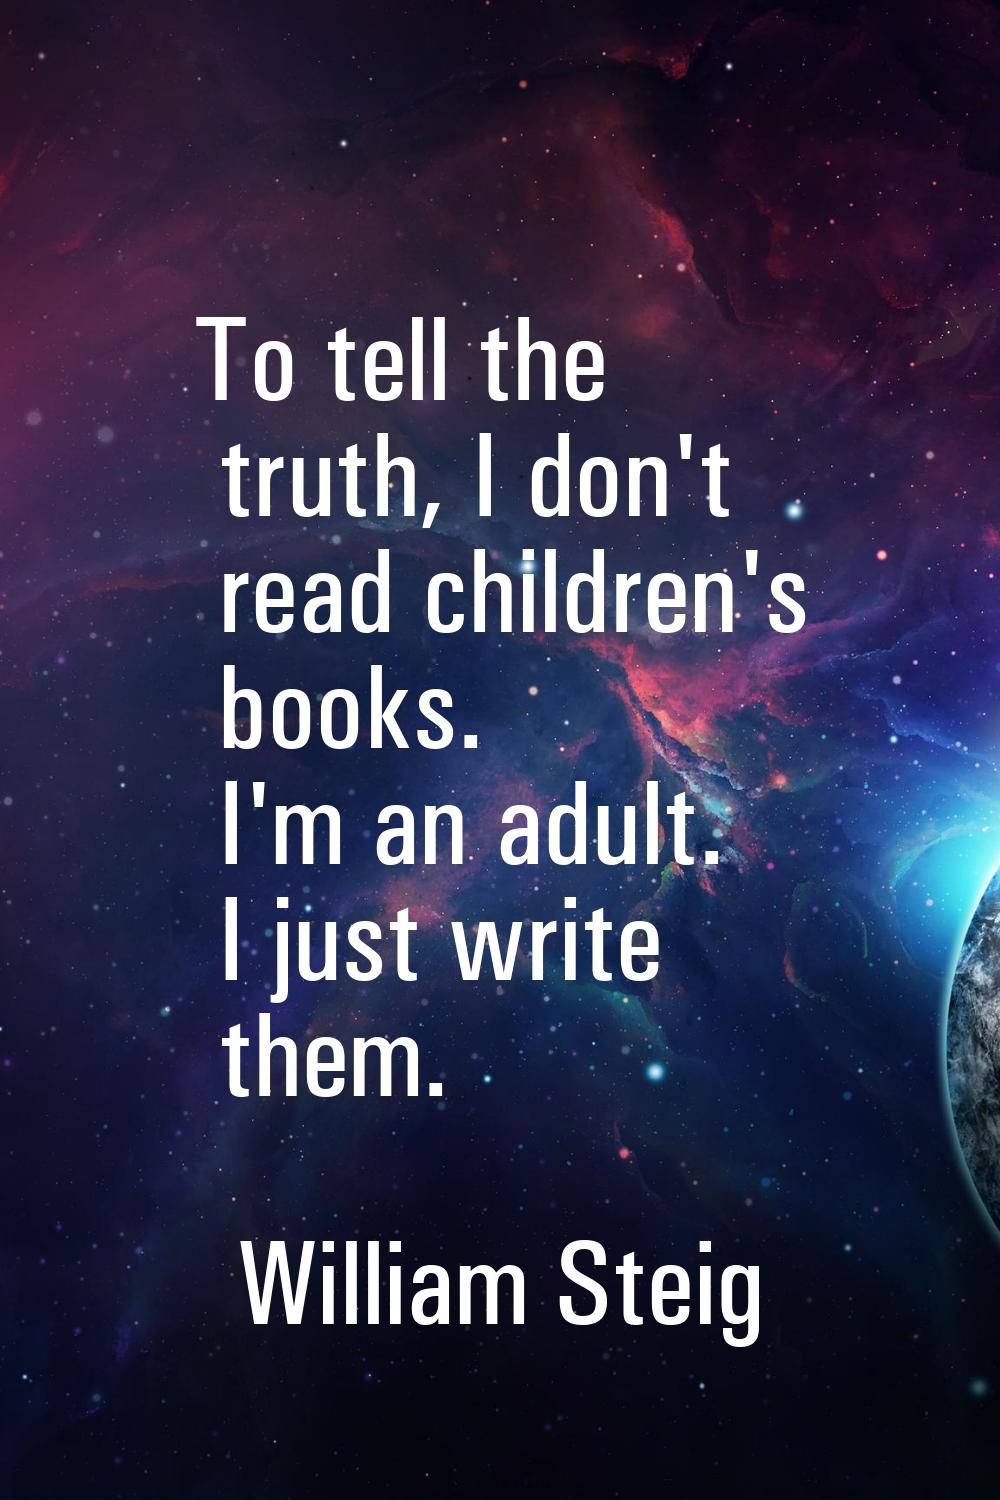 To tell the truth, I don't read children's books. I'm an adult. I just write them.